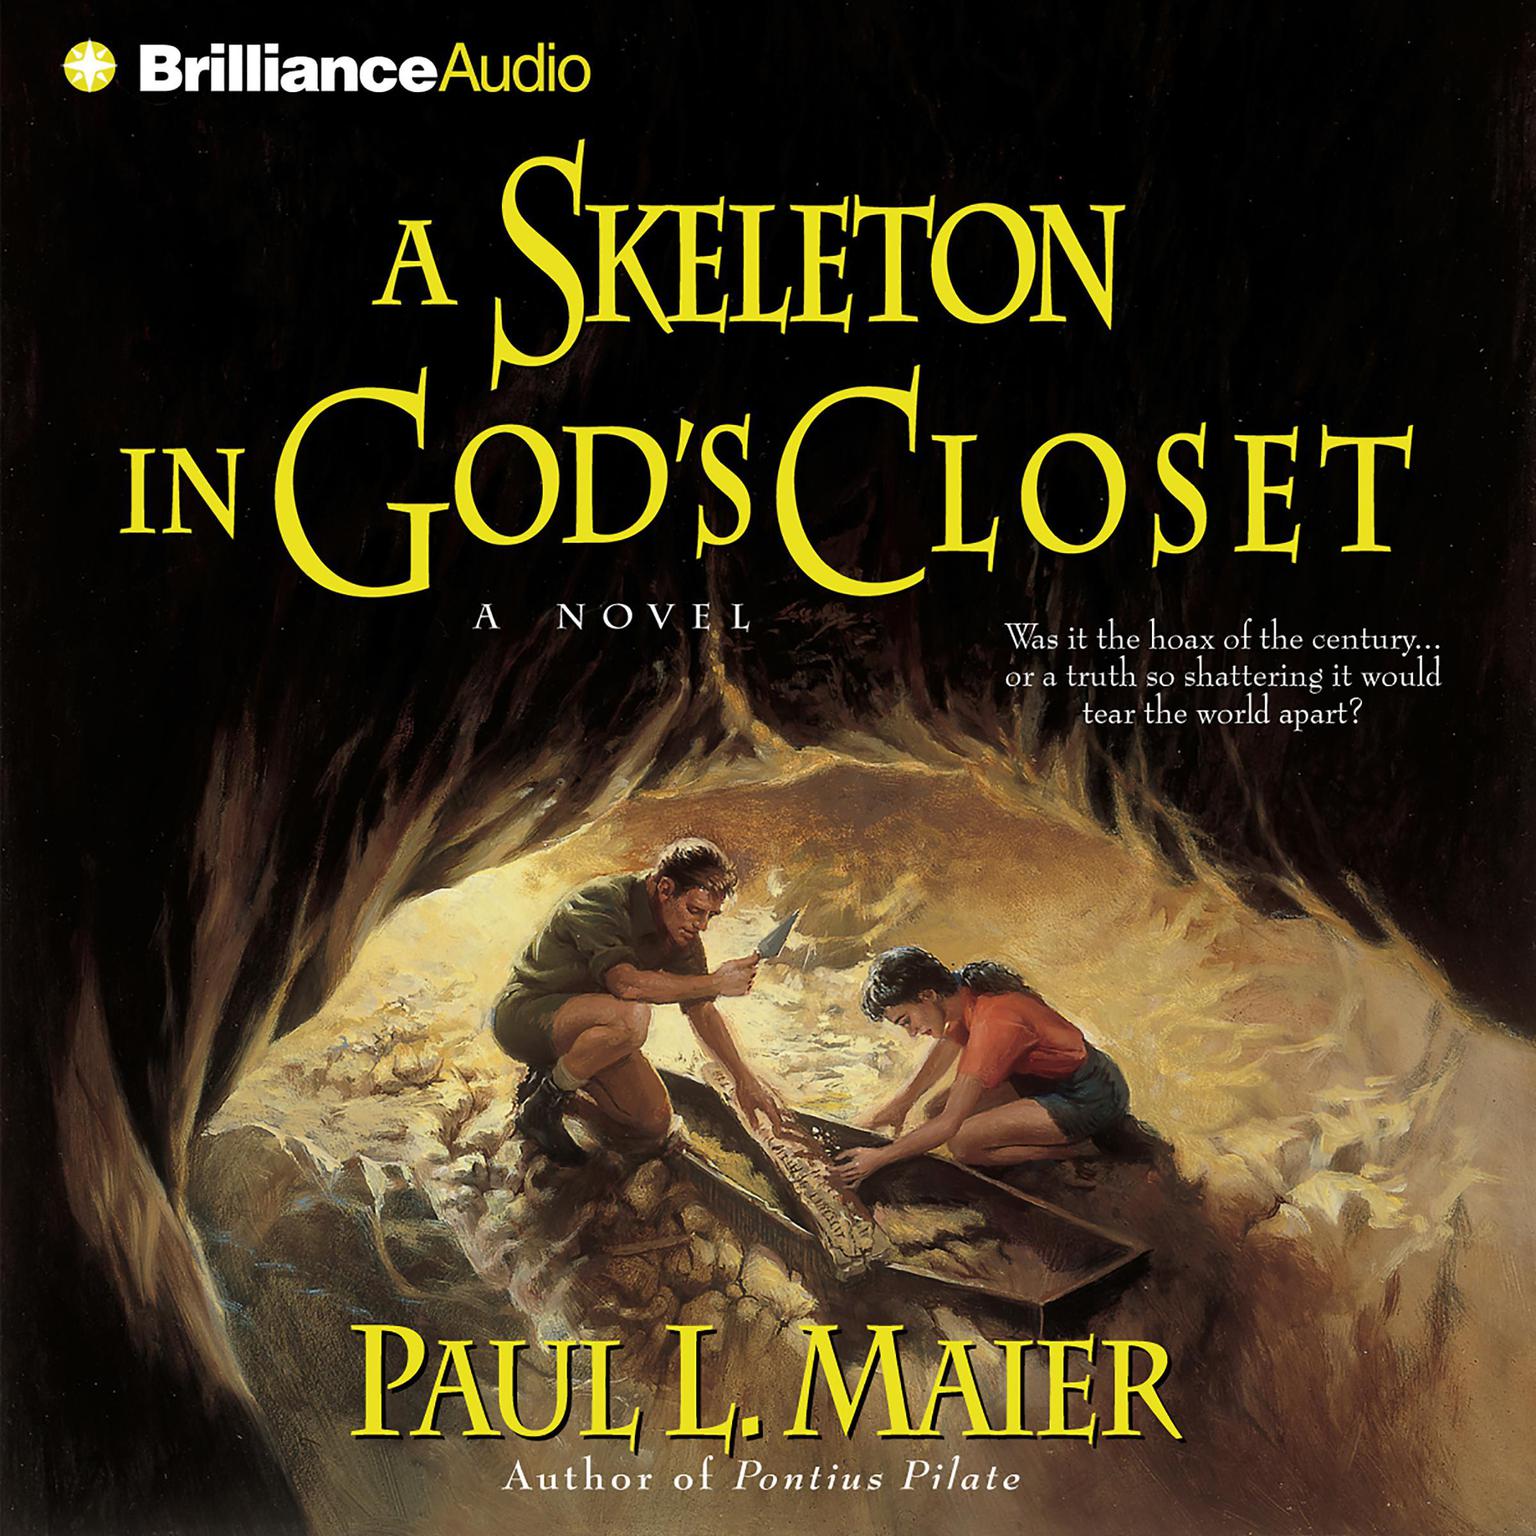 A Skeleton in Gods Closet (Abridged) Audiobook, by Paul L. Maier